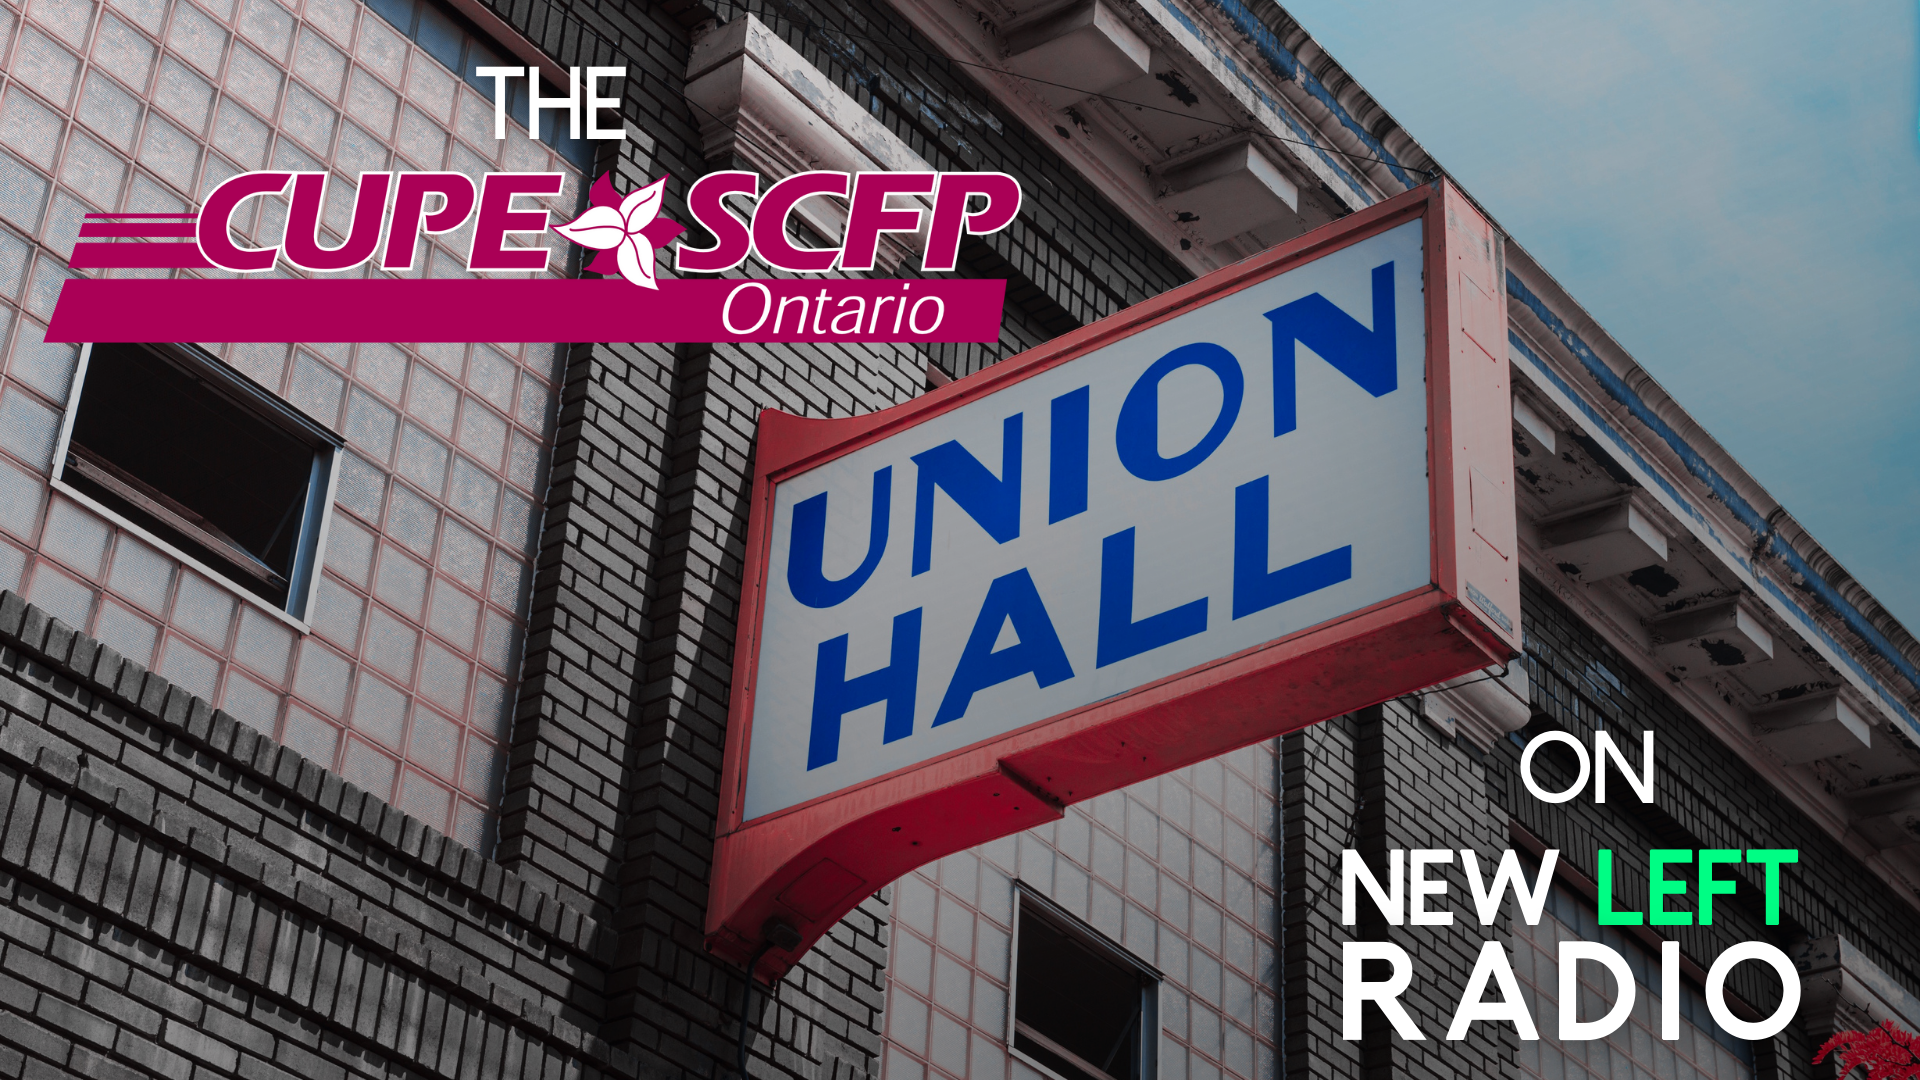 CUPE Ontario in "The Union Hall", on New Left Radio